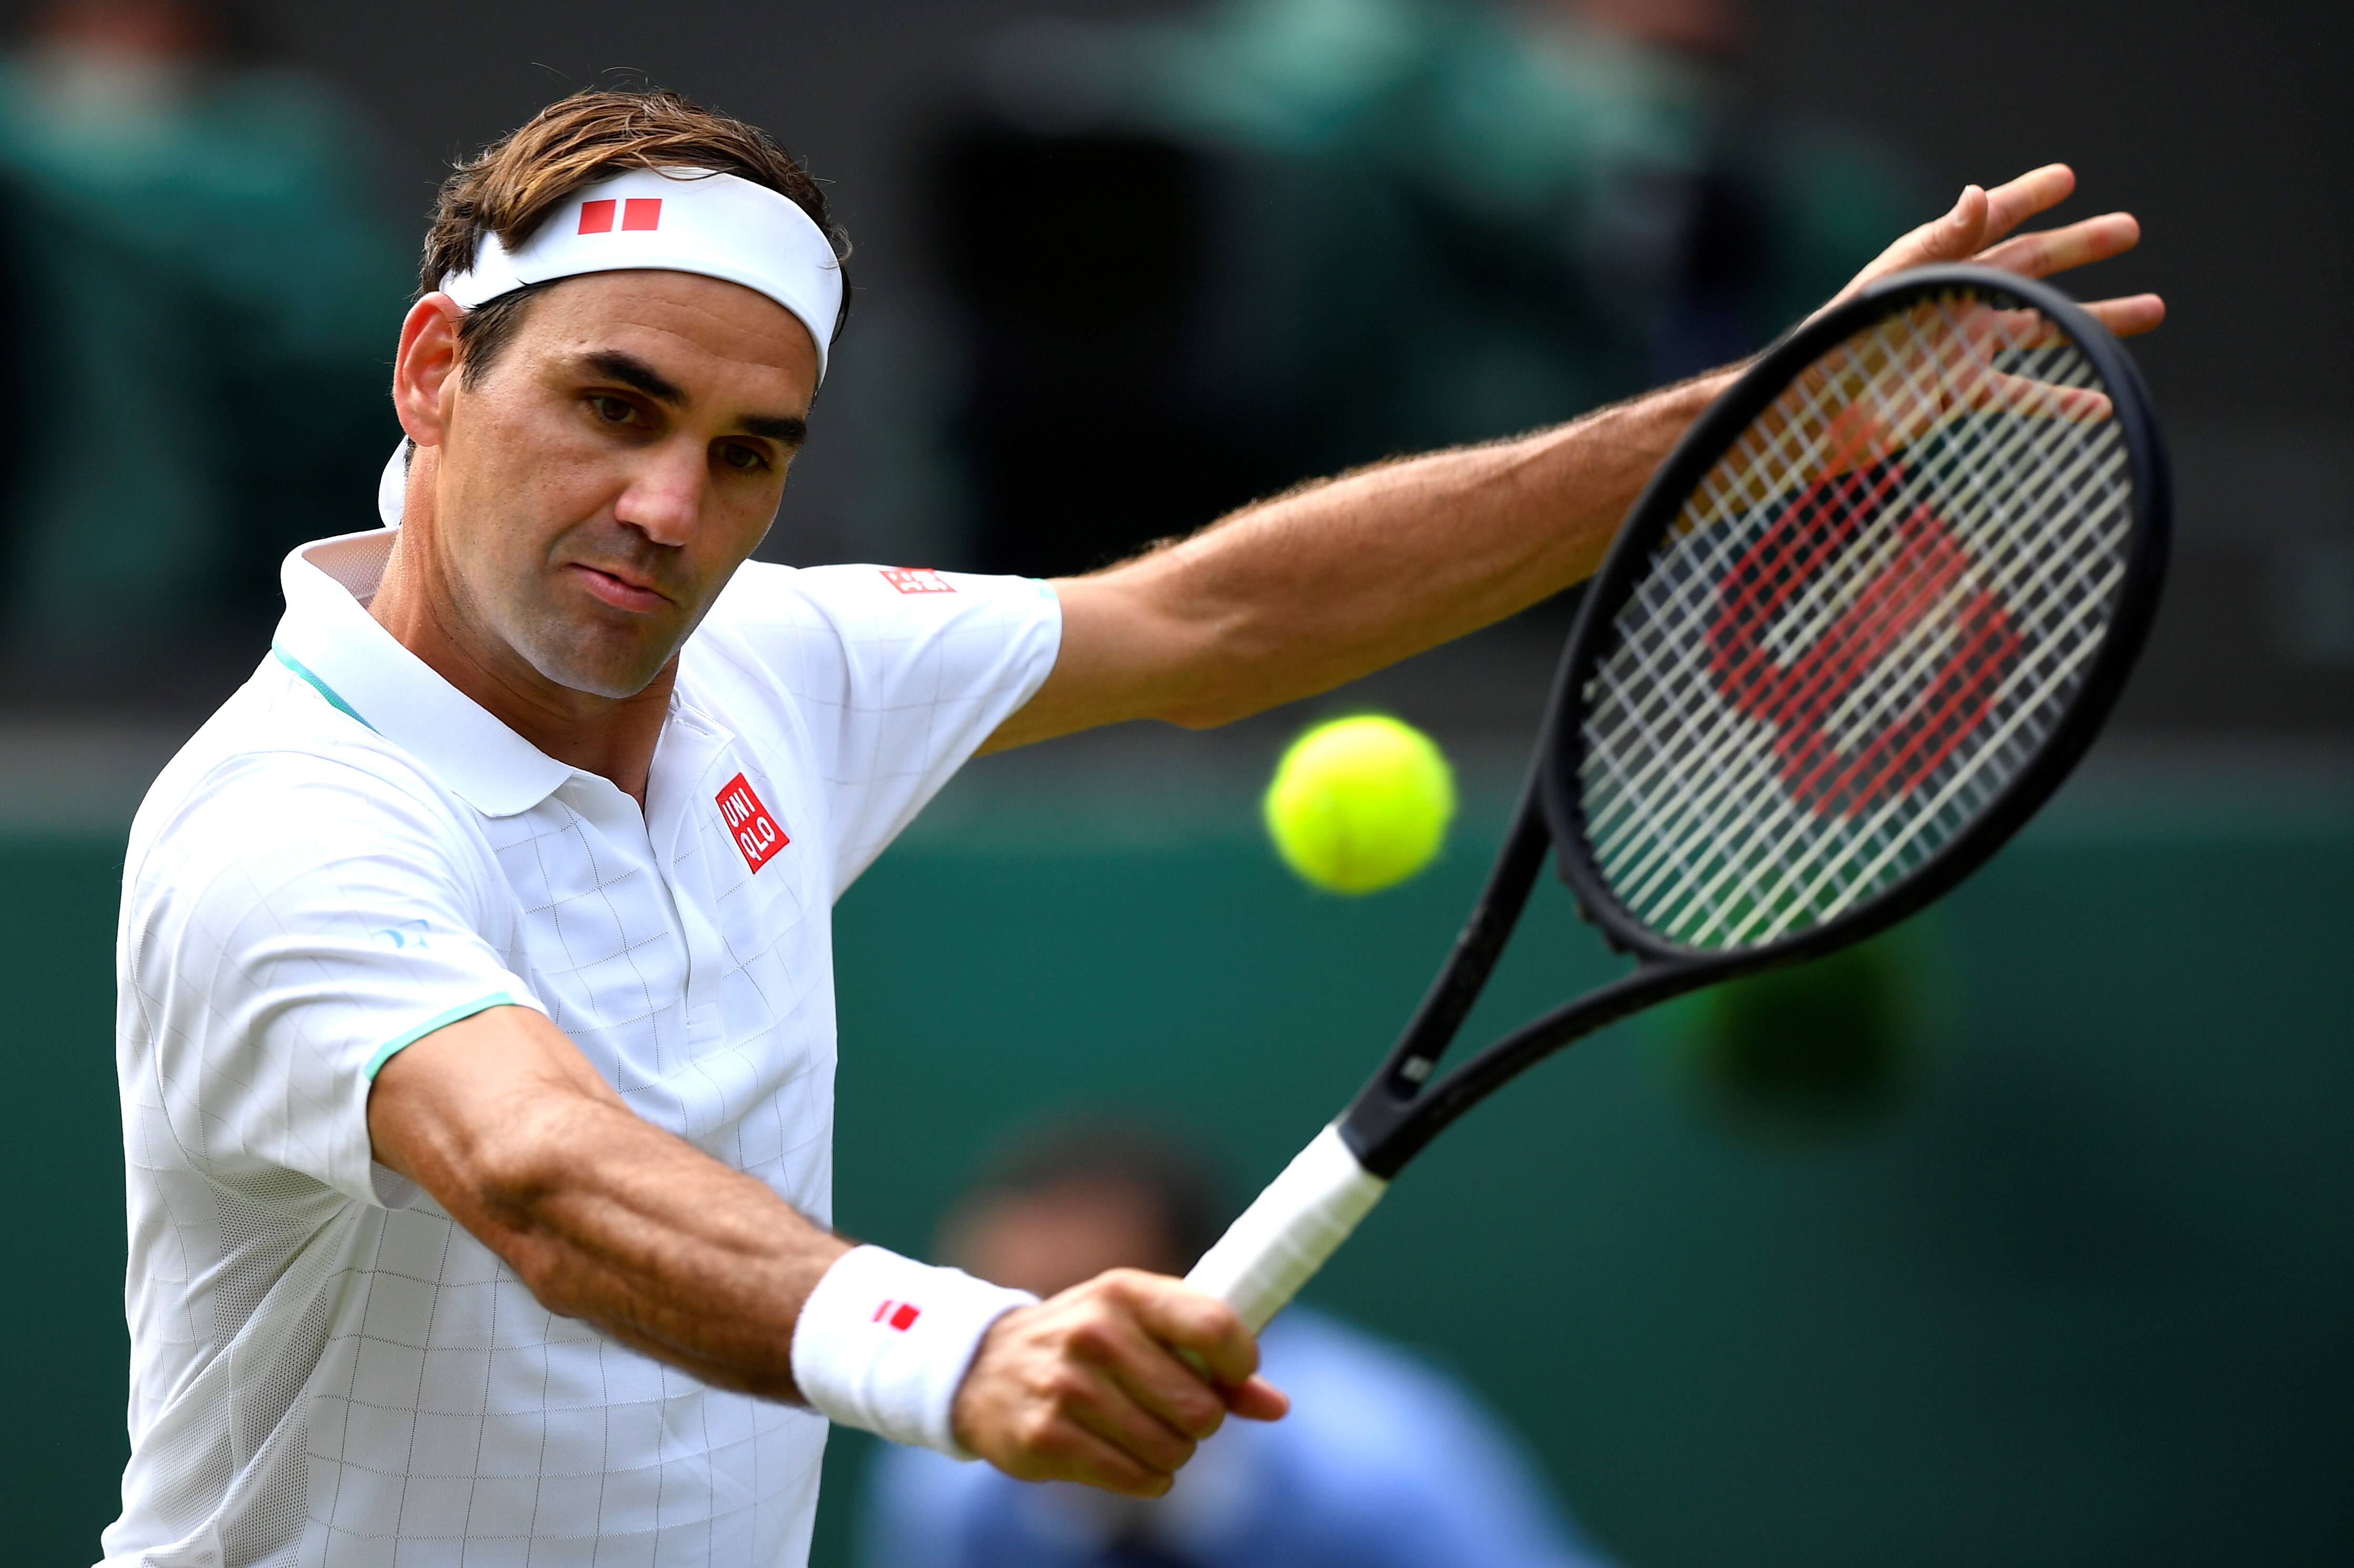 Switzerland's Roger Federer in action during his third round match at Wimbledon